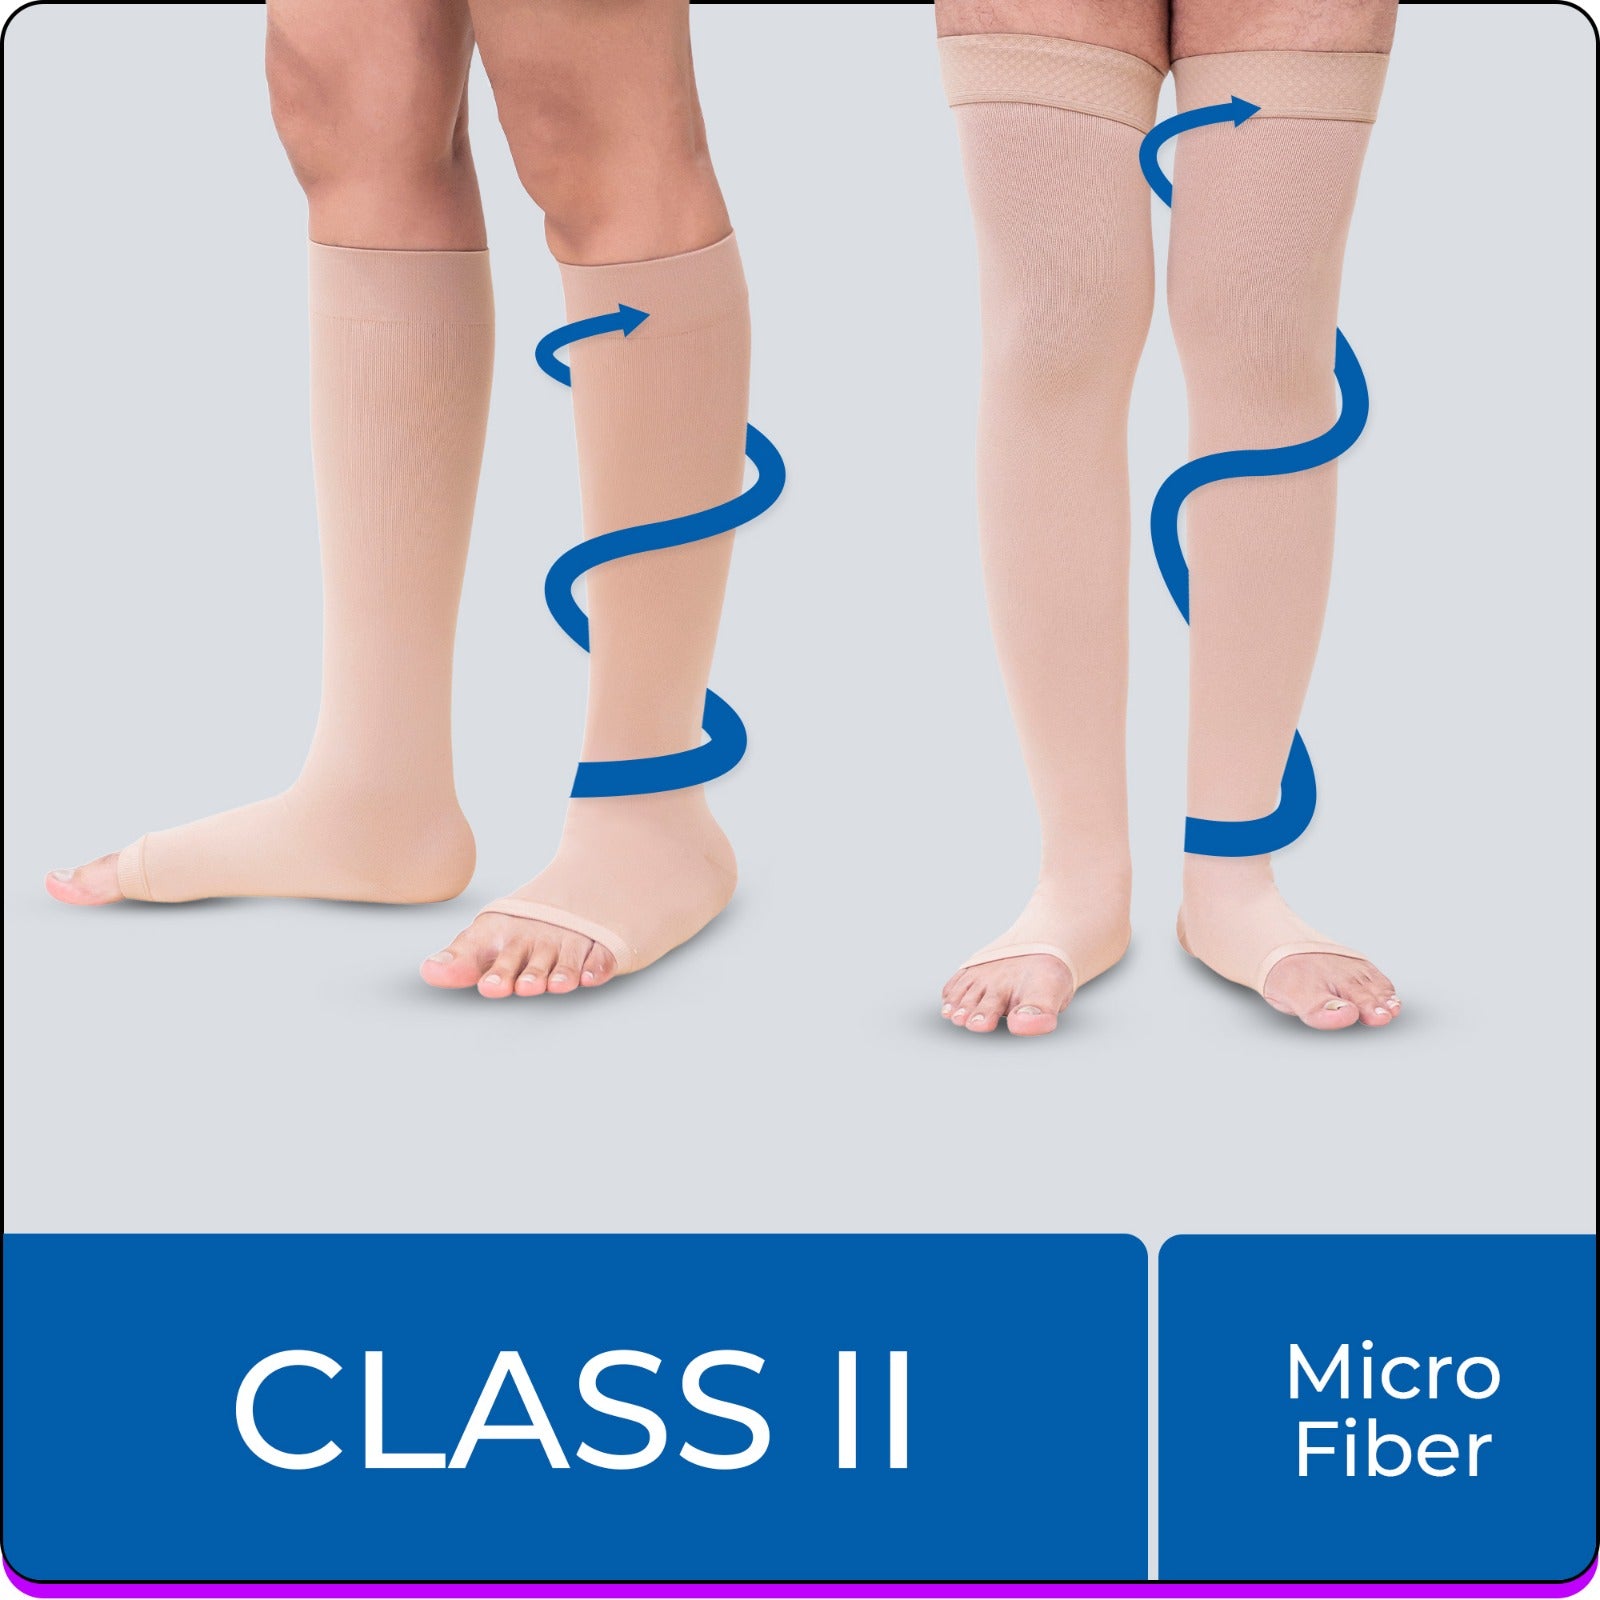 Sorgen® Royale Class 2 Compression Stocking for Vericose Veins - Knee/Thigh Length